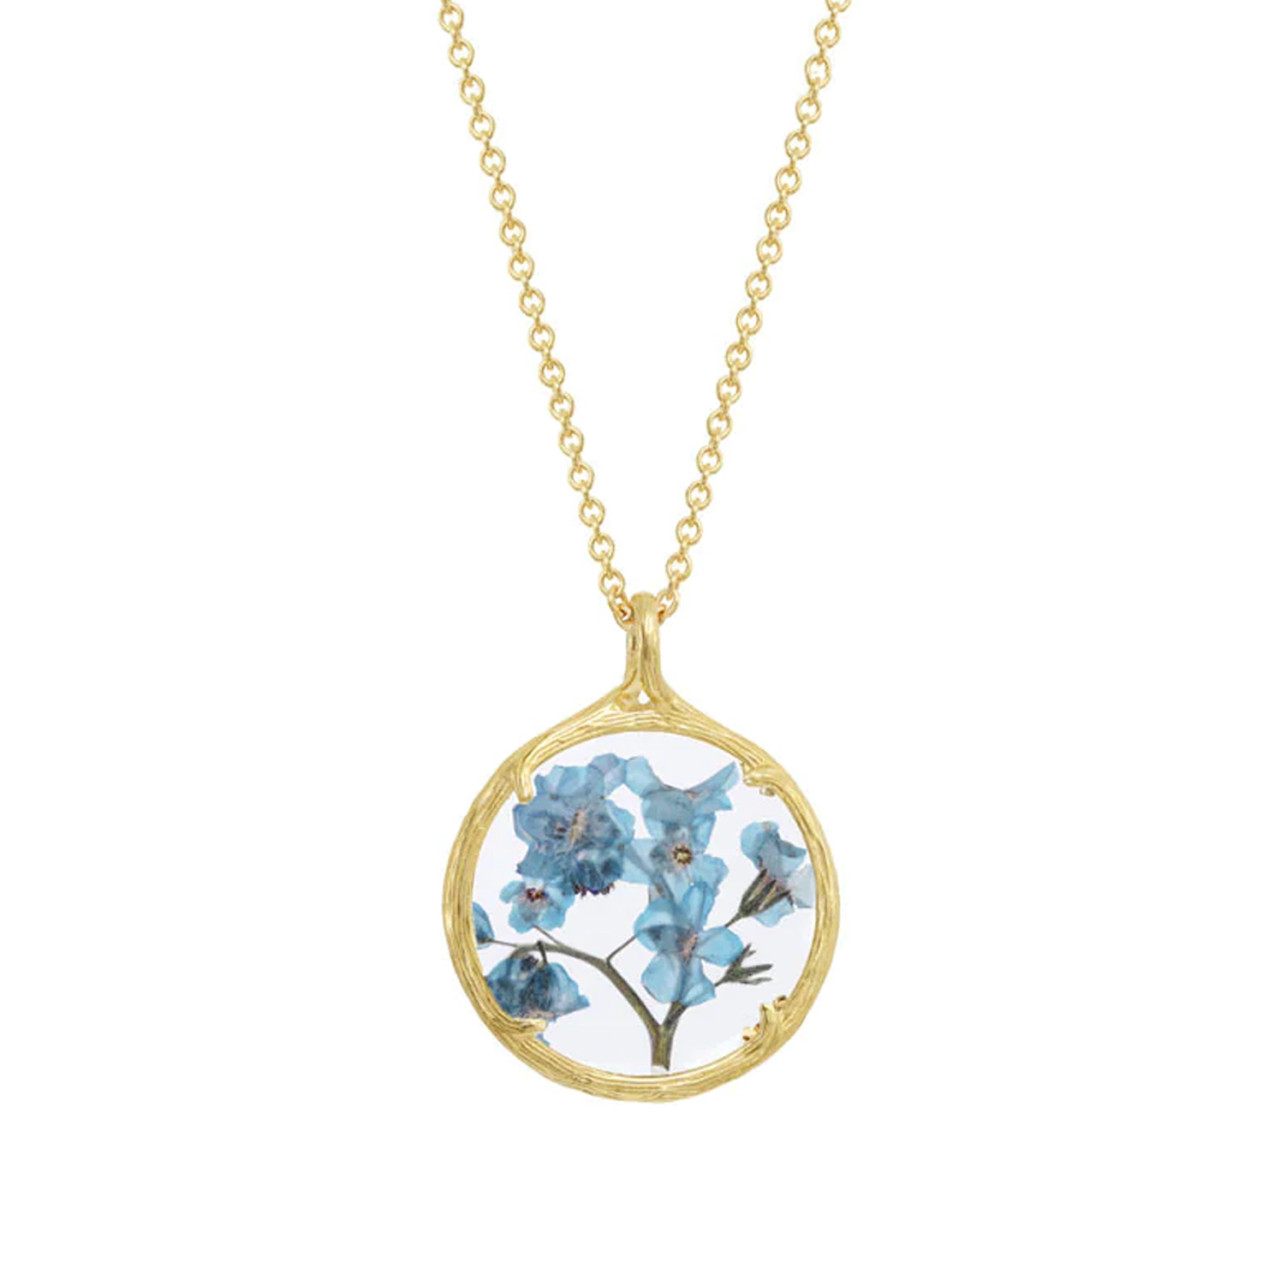 Gold Plated Small Glass Botanical Pendant Forget-Me-Not, Catherine Weitzman, tomfoolery